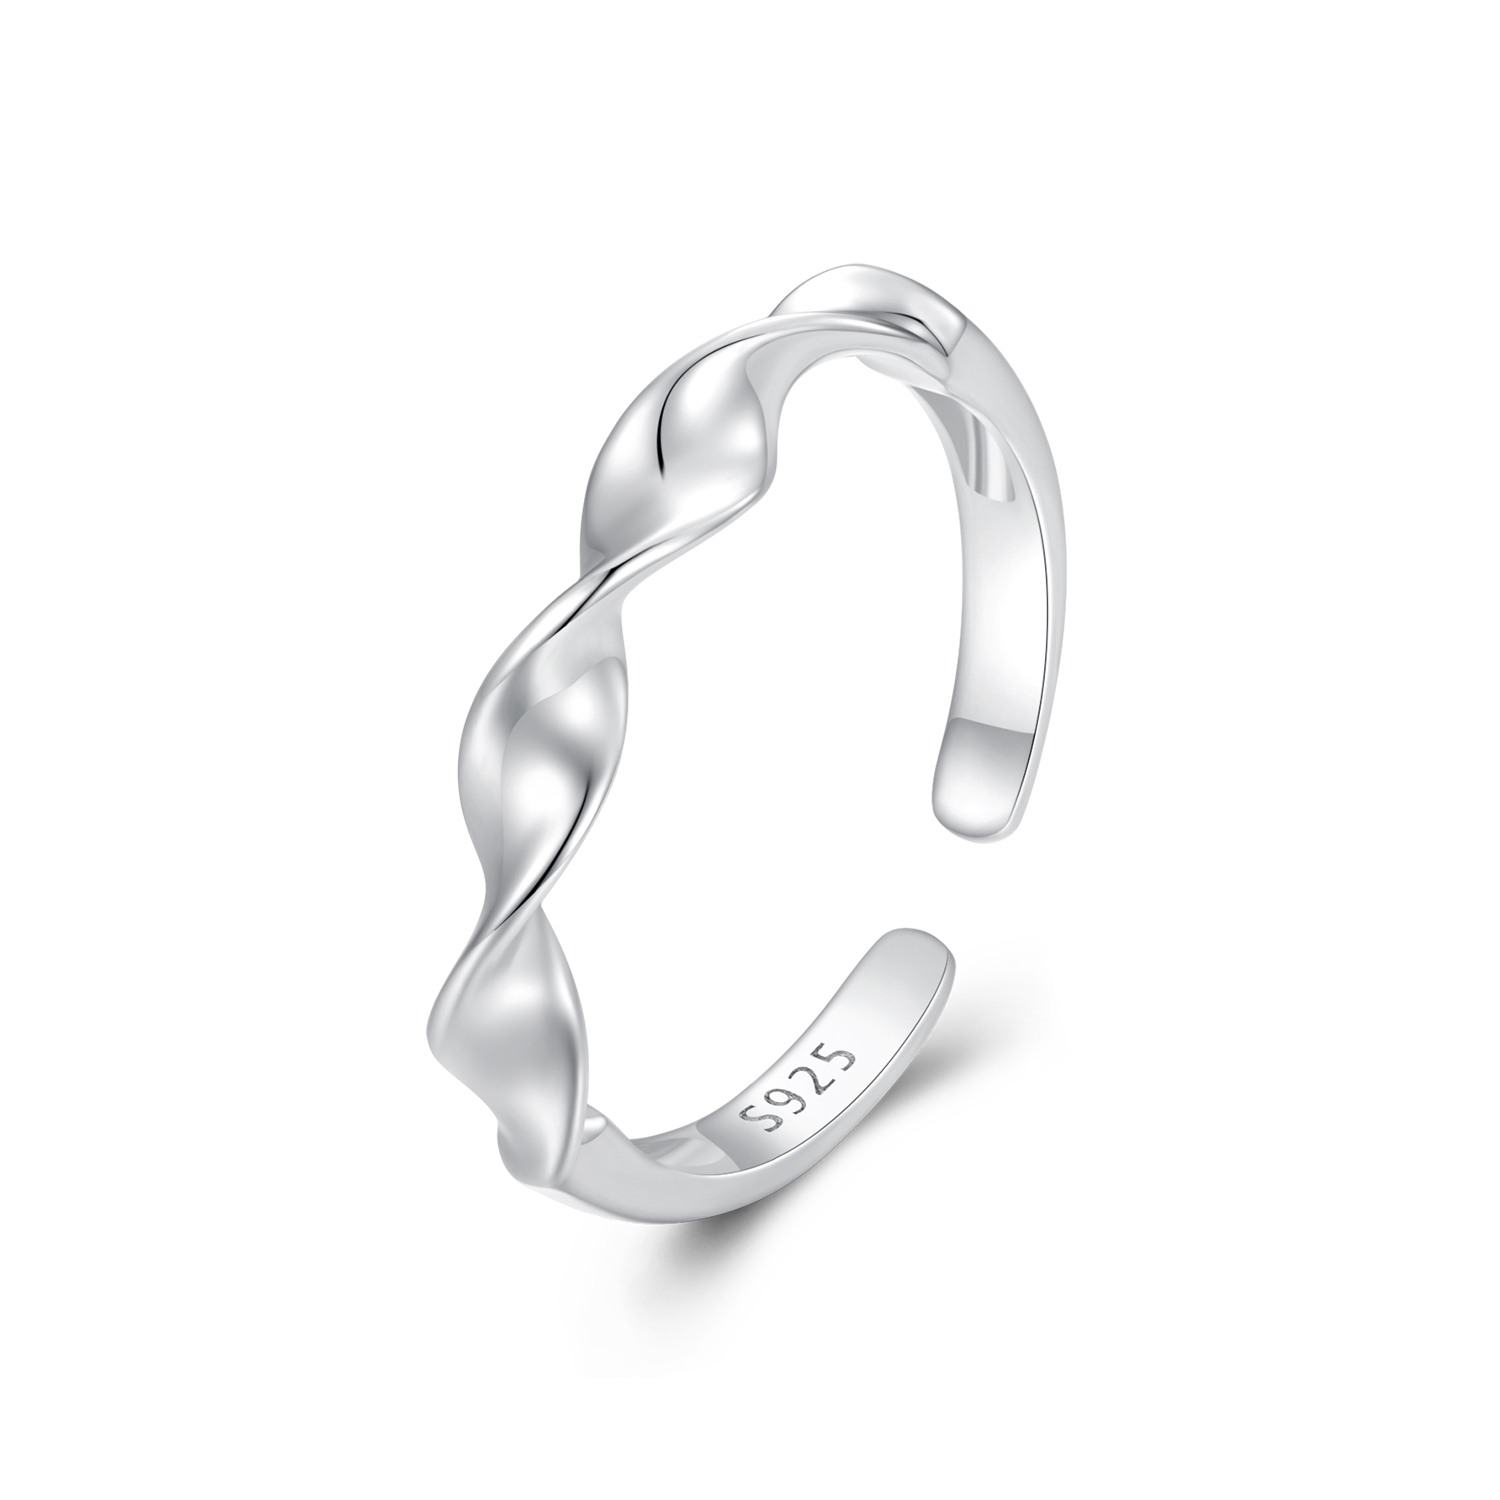 pandora style twisted sterling silver ring bsr468 e